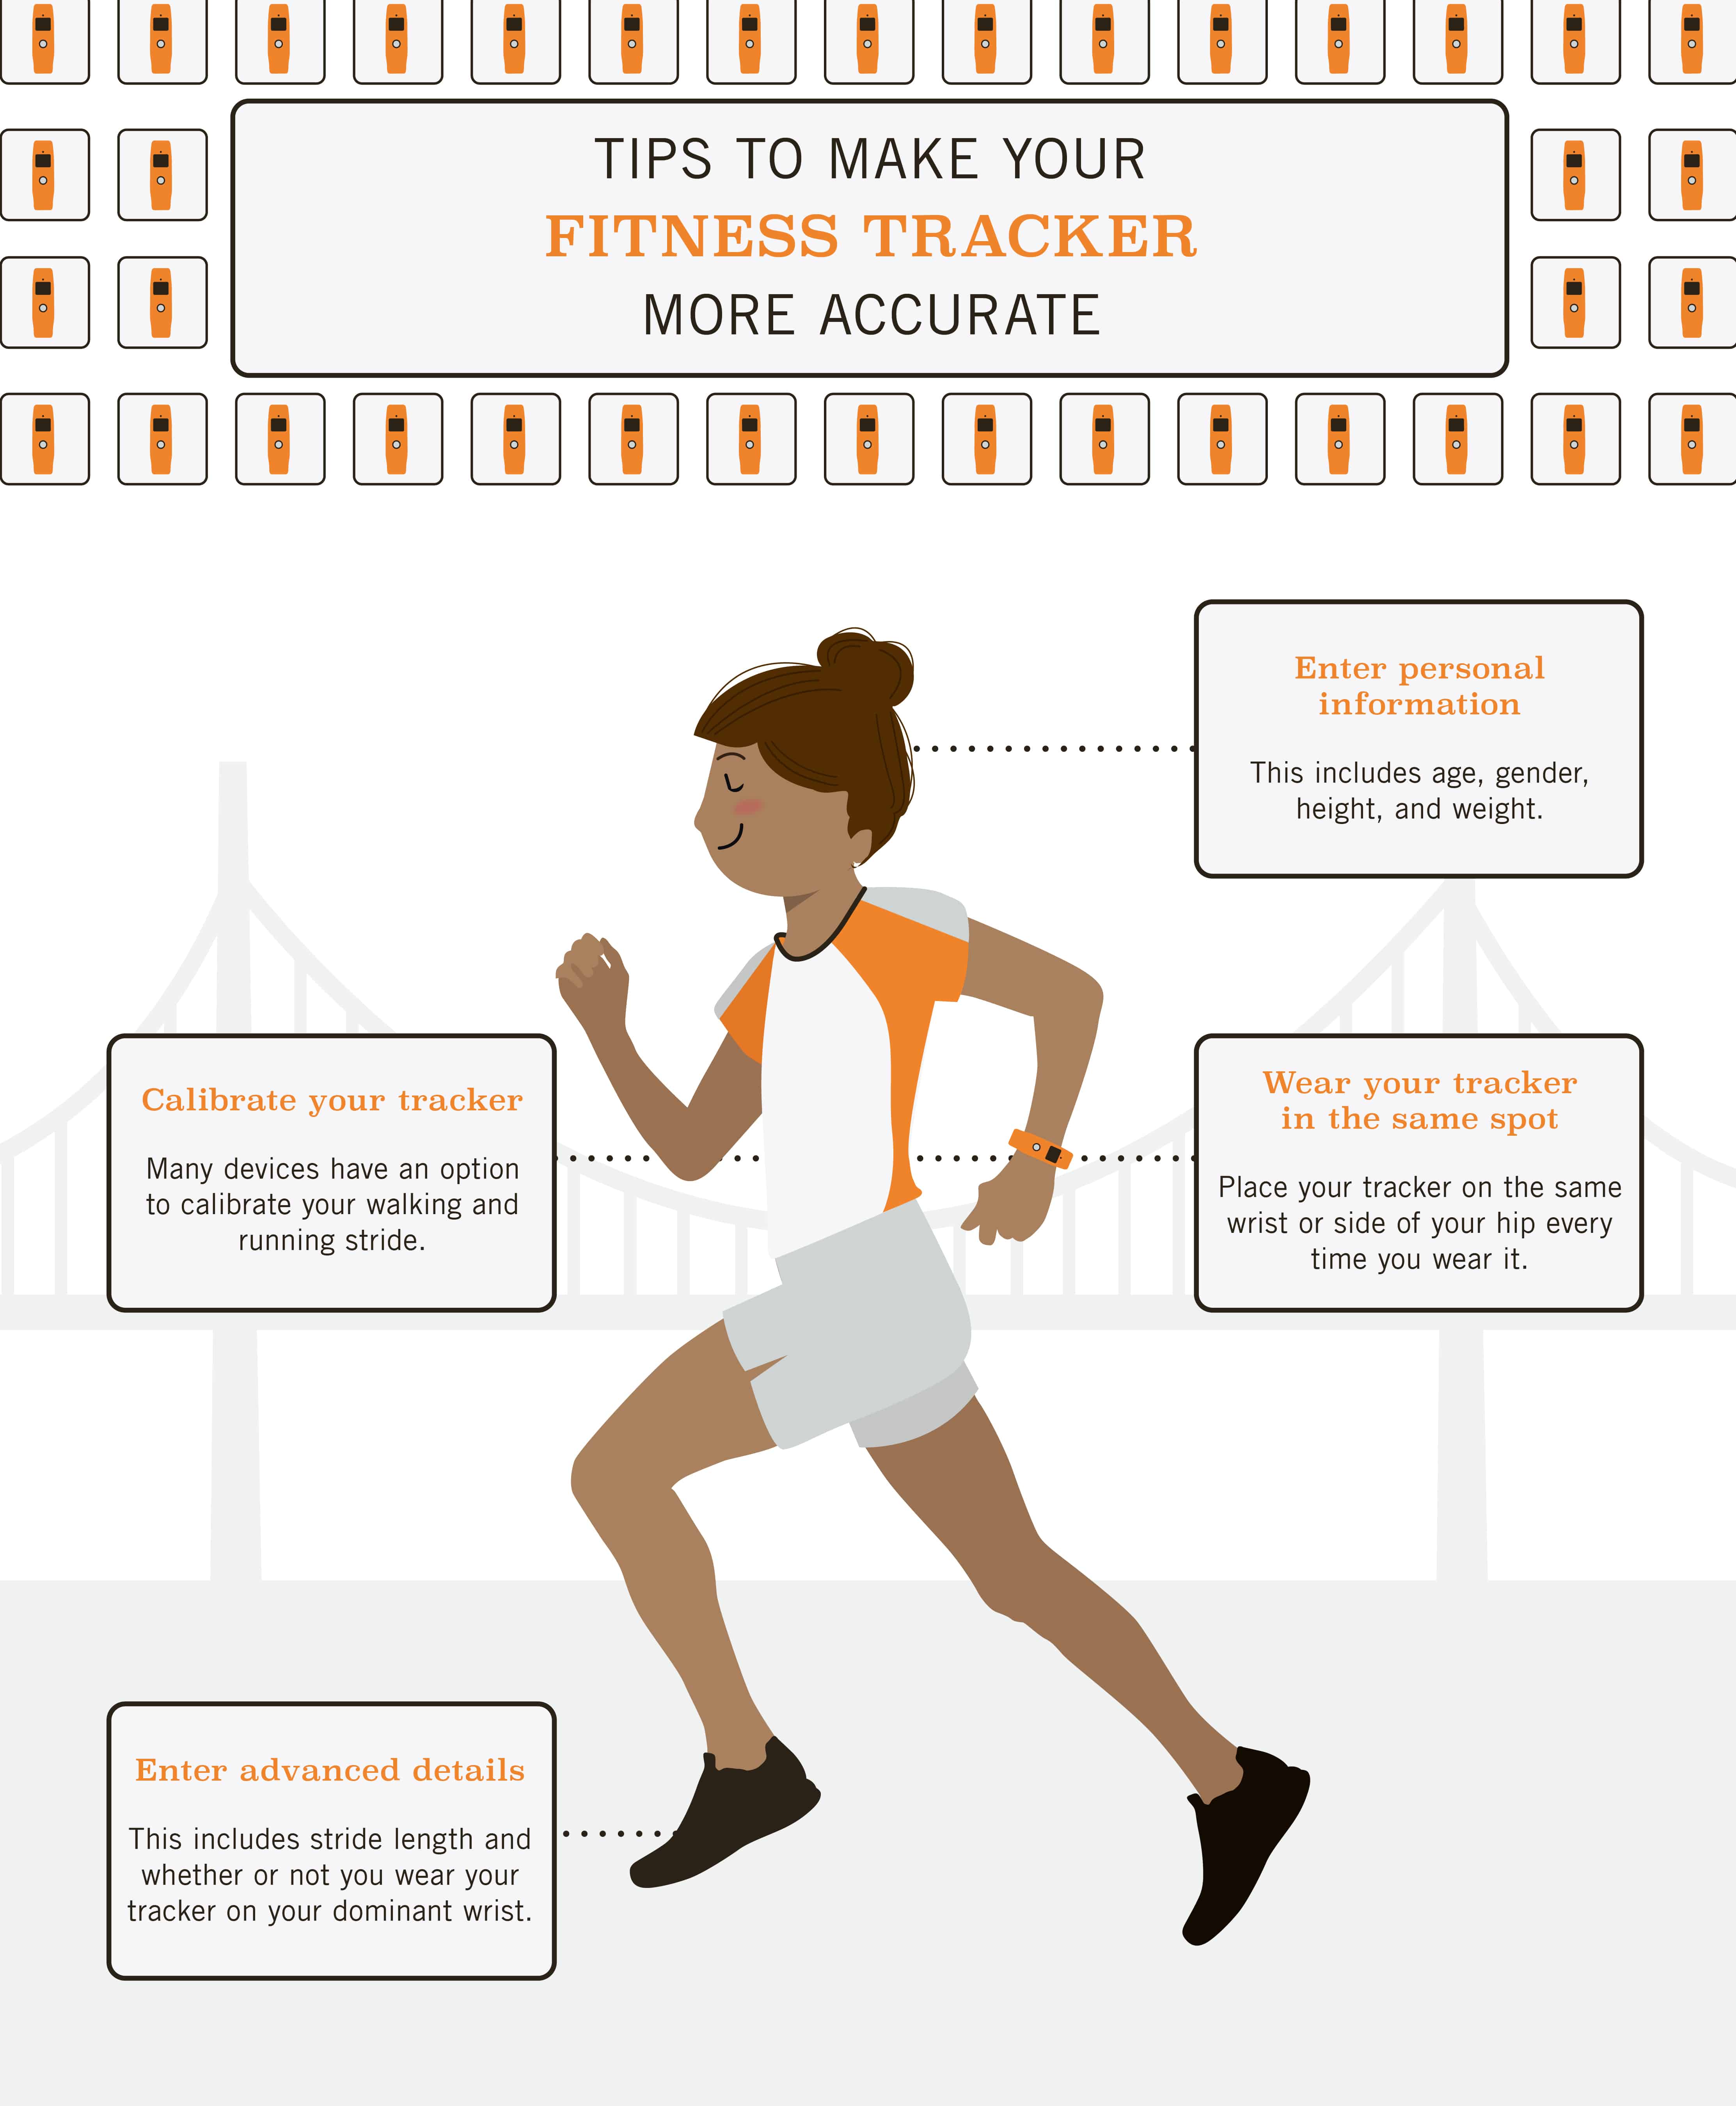 How To Get More Out of Your Fitness Tracker